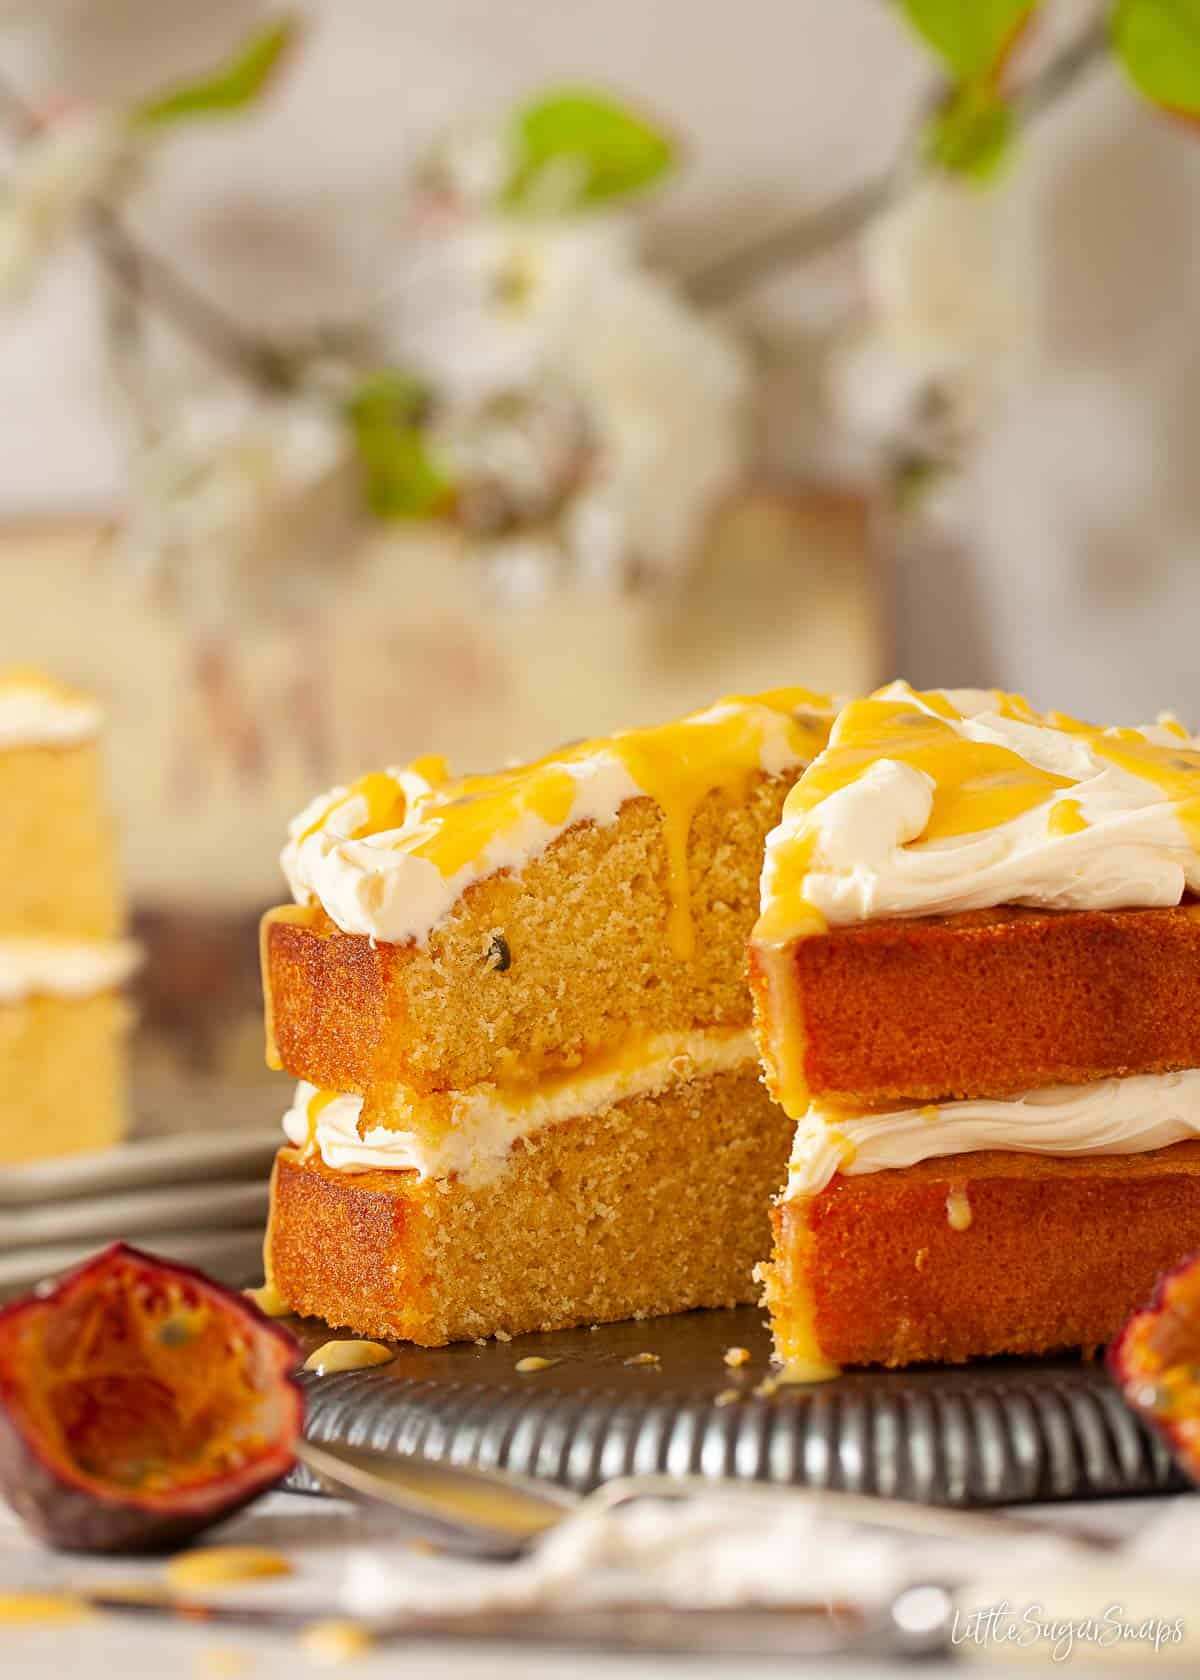 A passion fruit curd cake with a piece cut out of it.